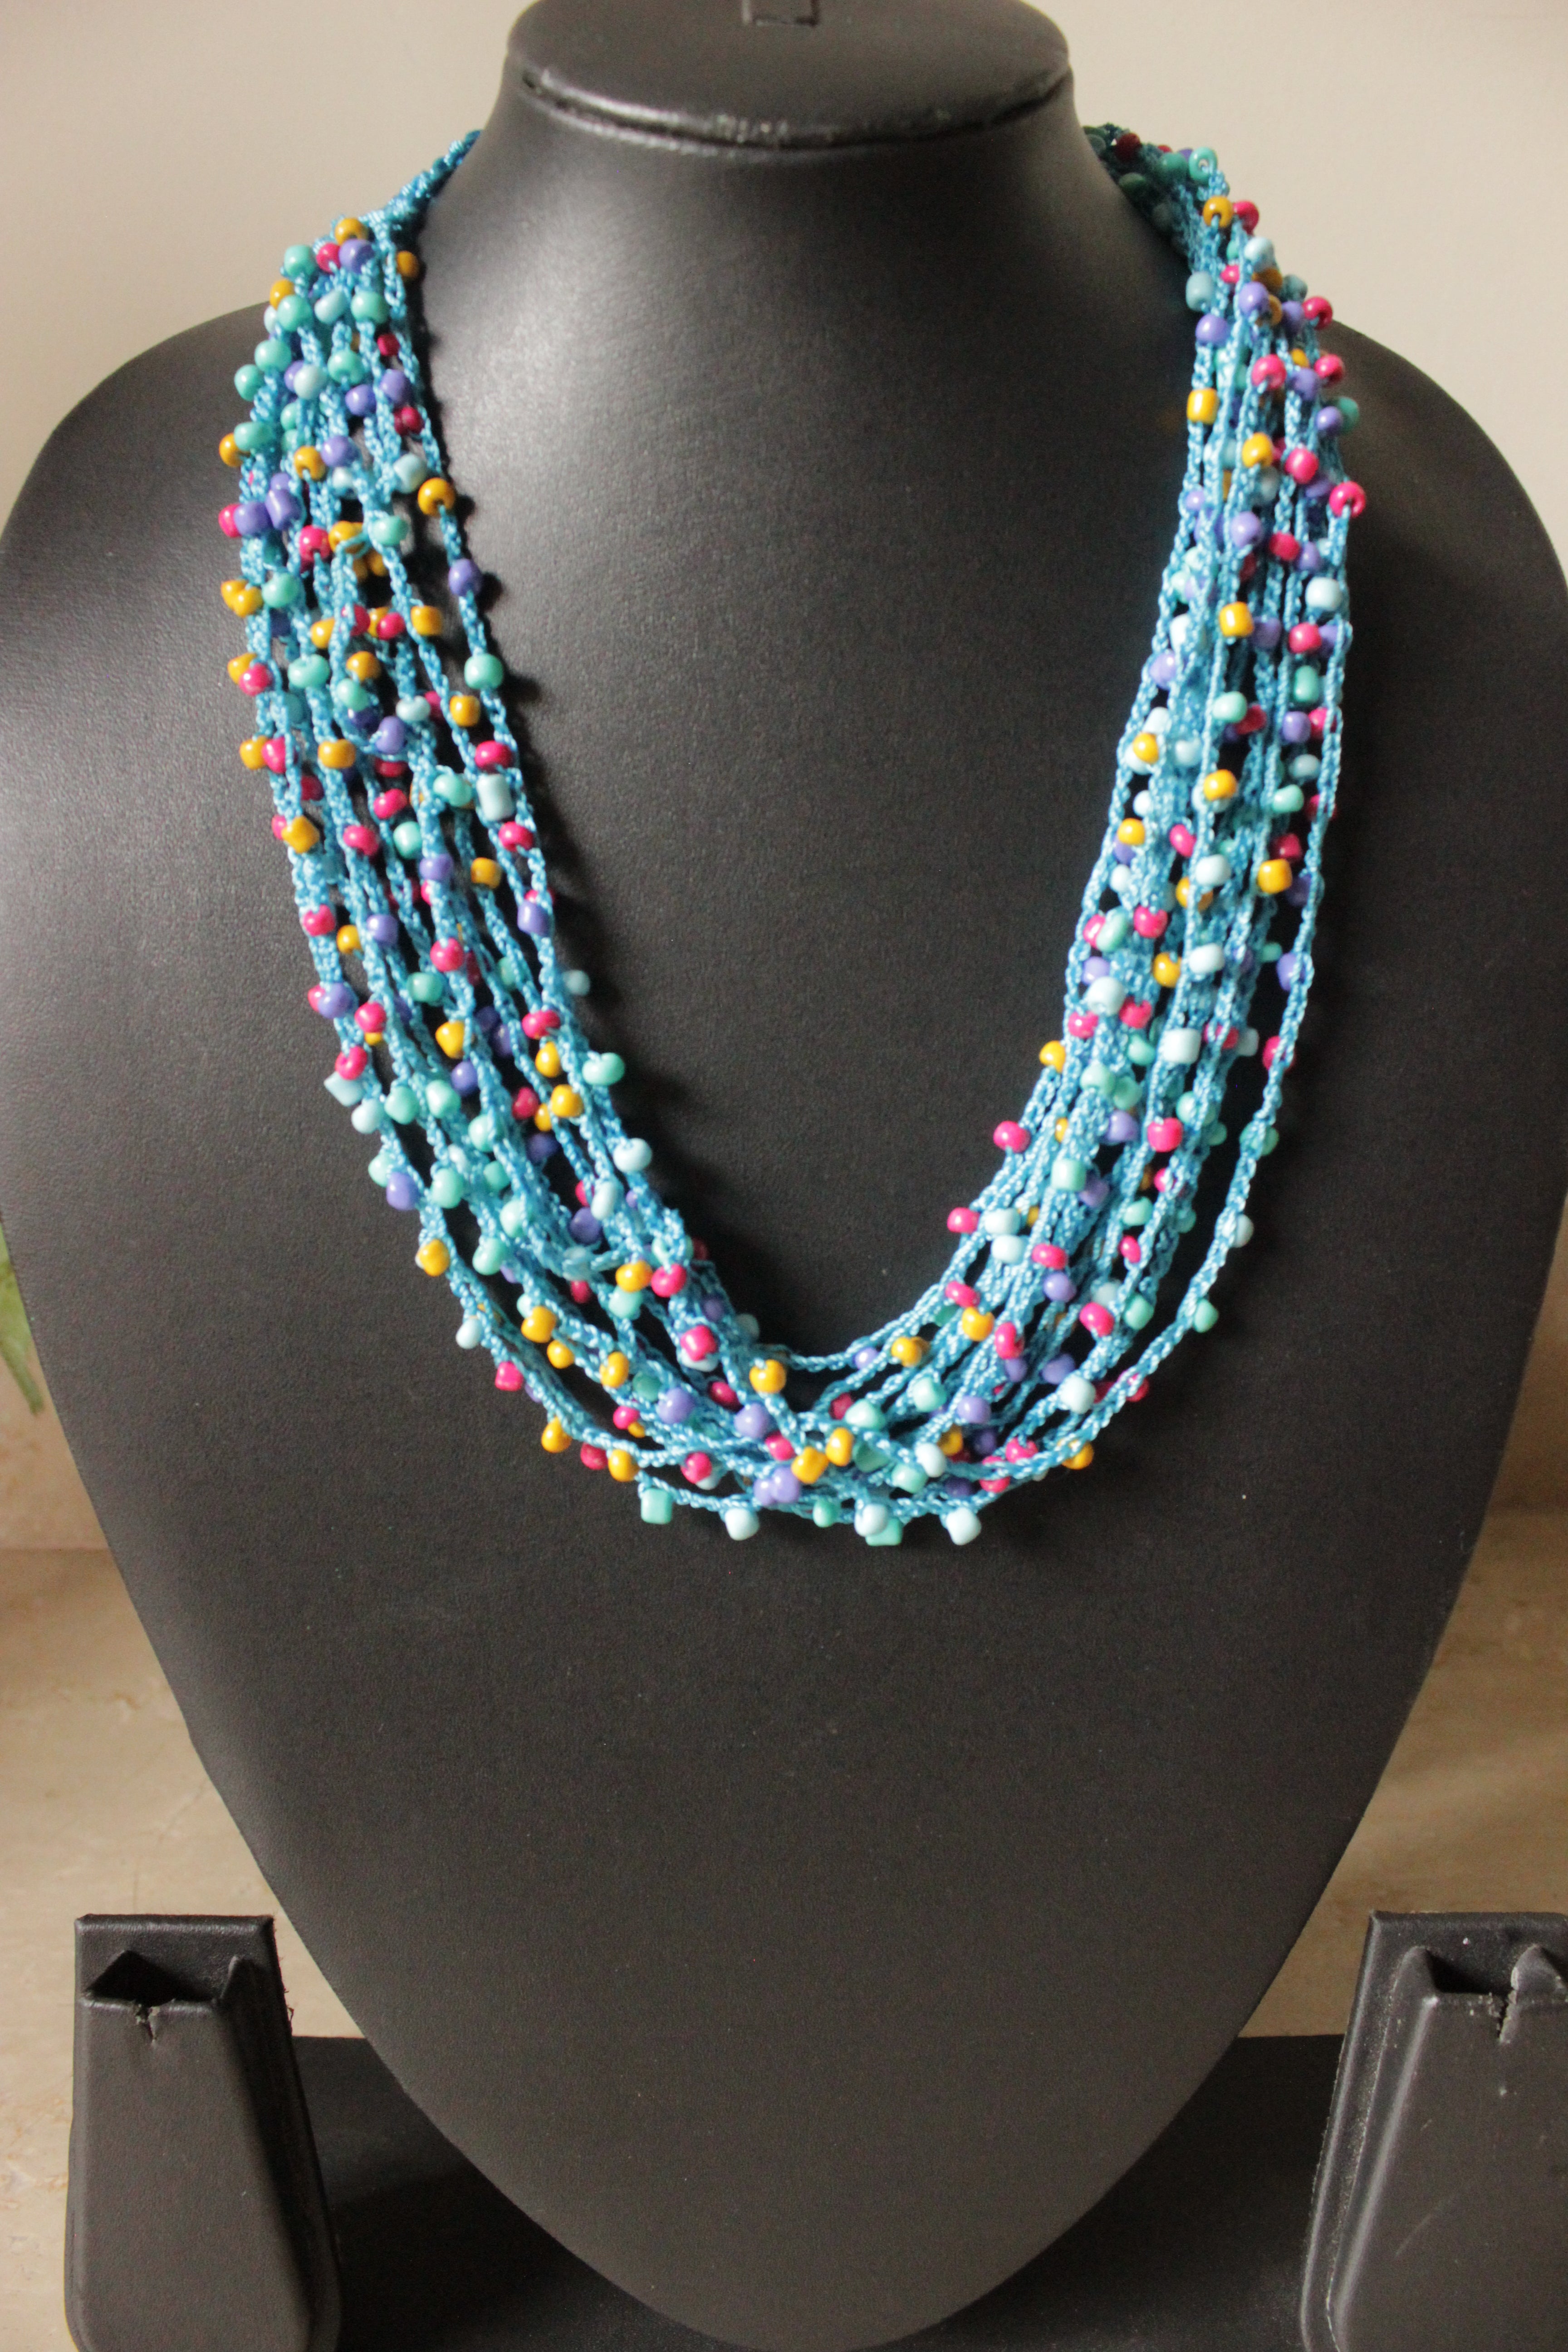 Braided Wooden Beads and Fabric Multi-Layer Necklace